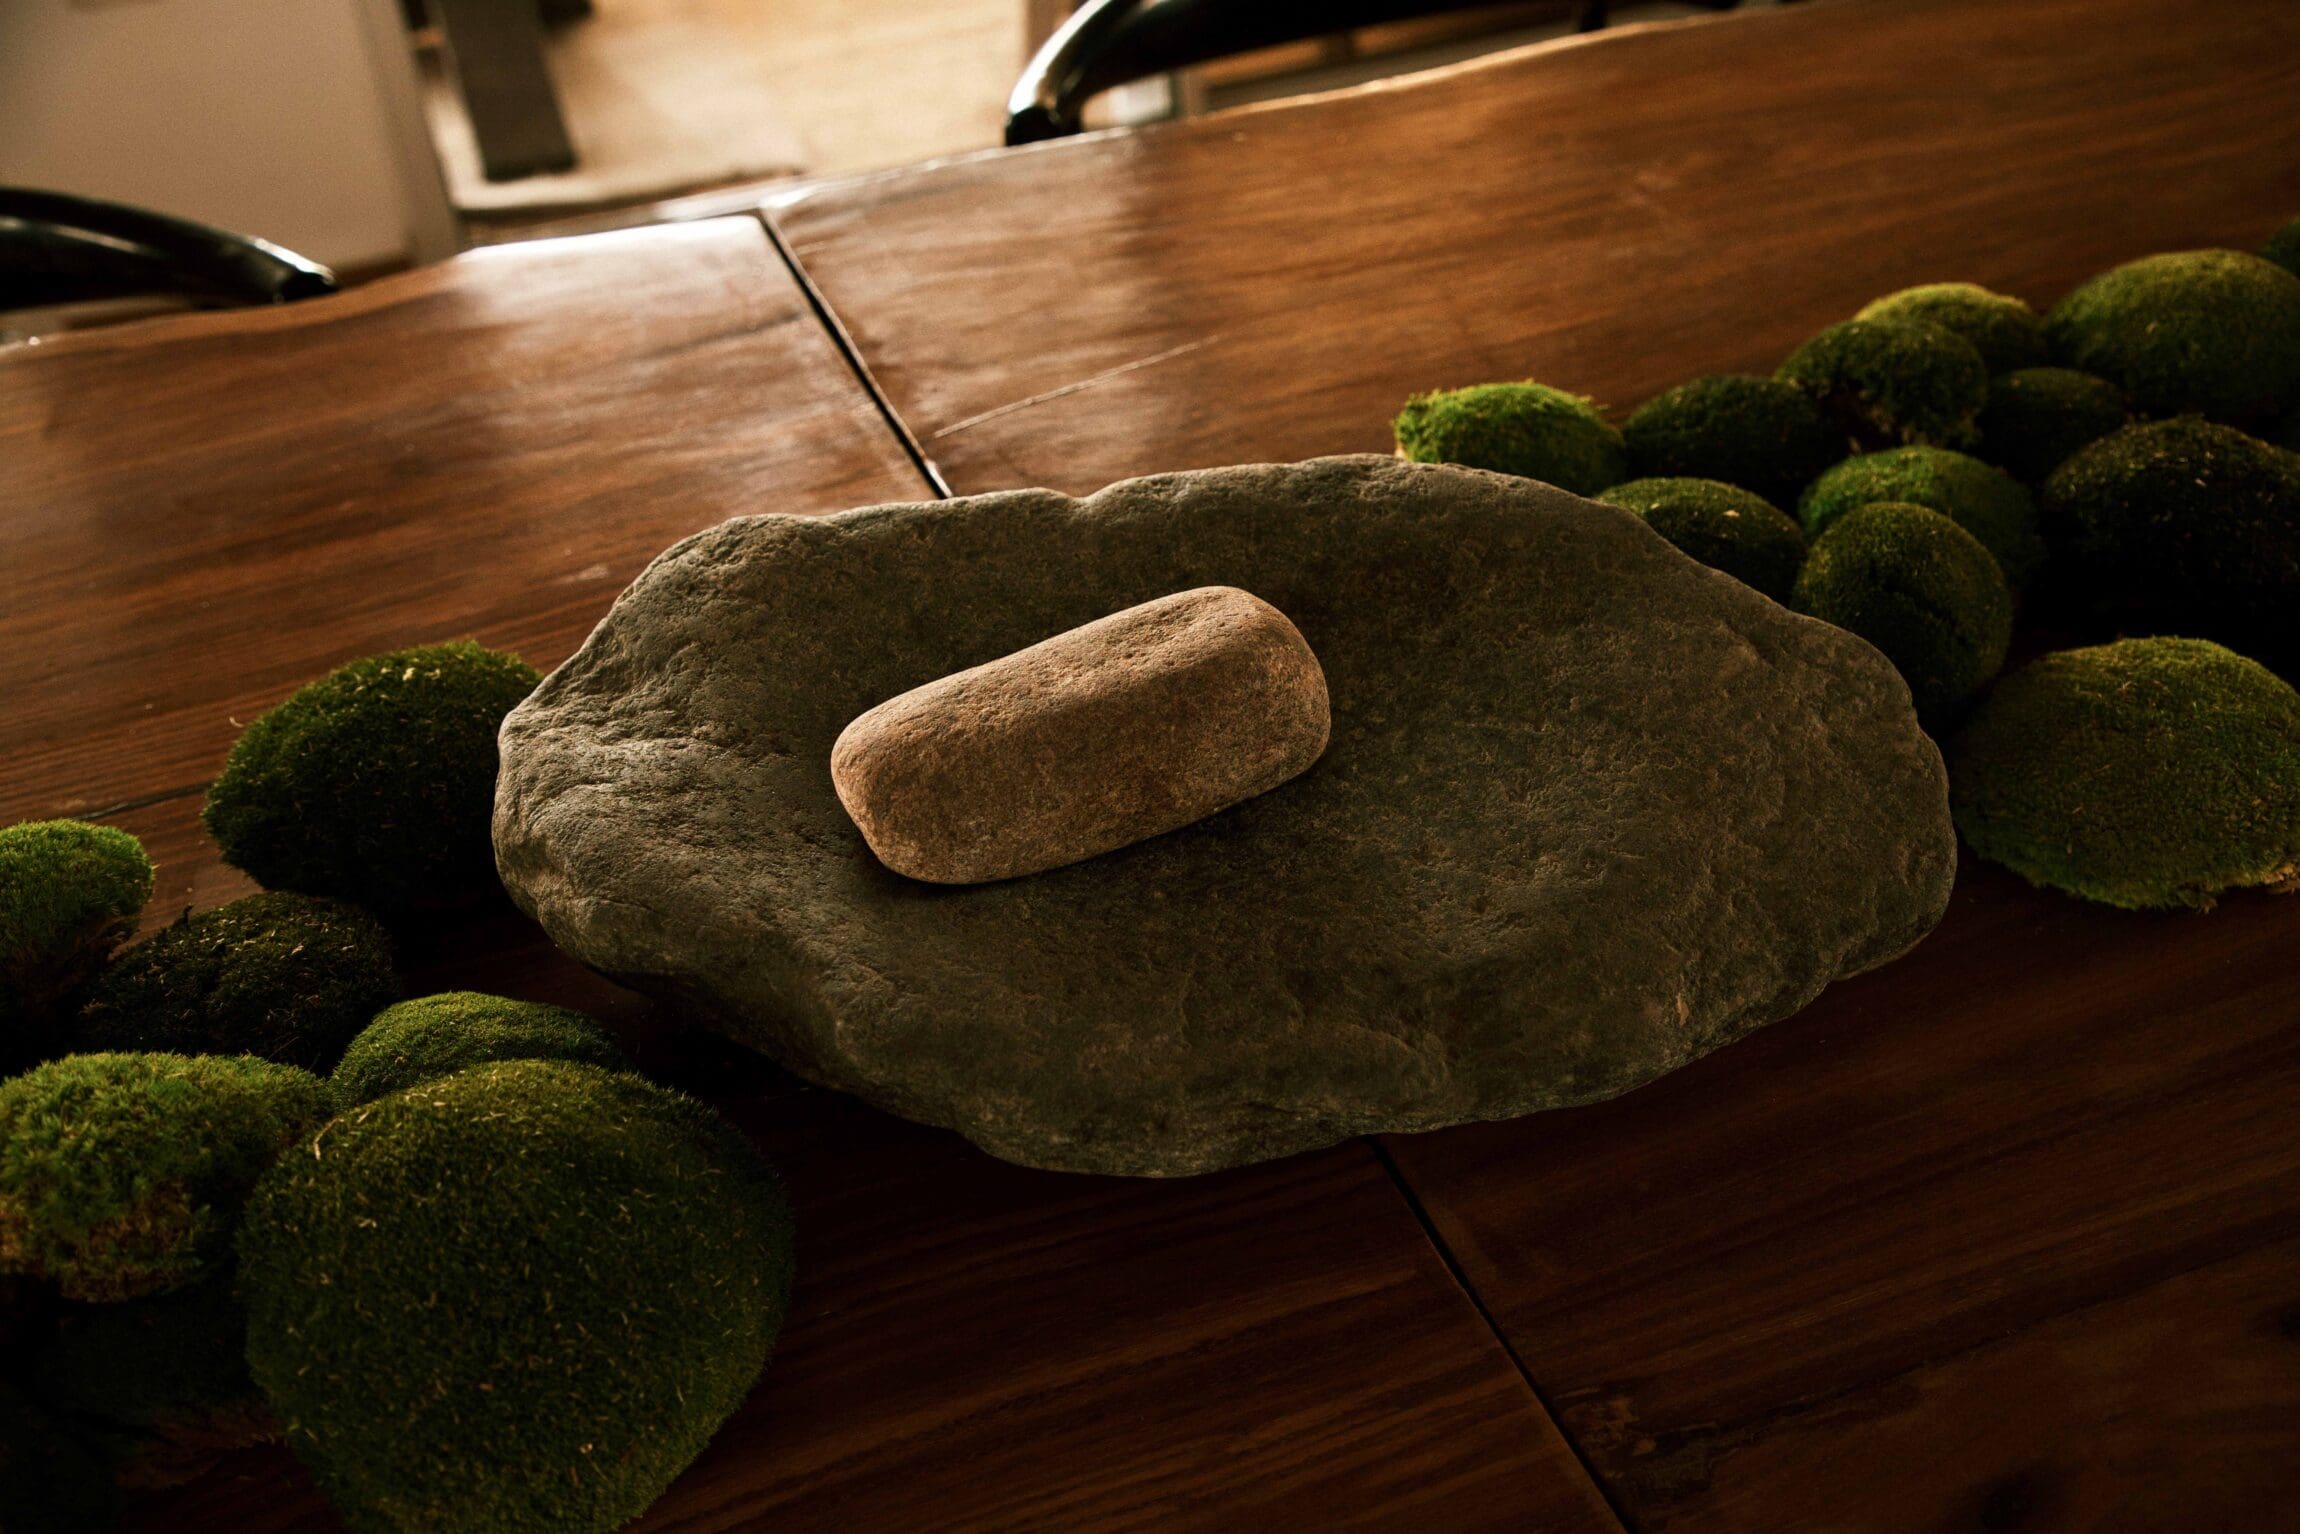 A traditional stone used to grind pepper and other herbs in Nigerian cuisine, on display at Ìtàn Test Kitchen.